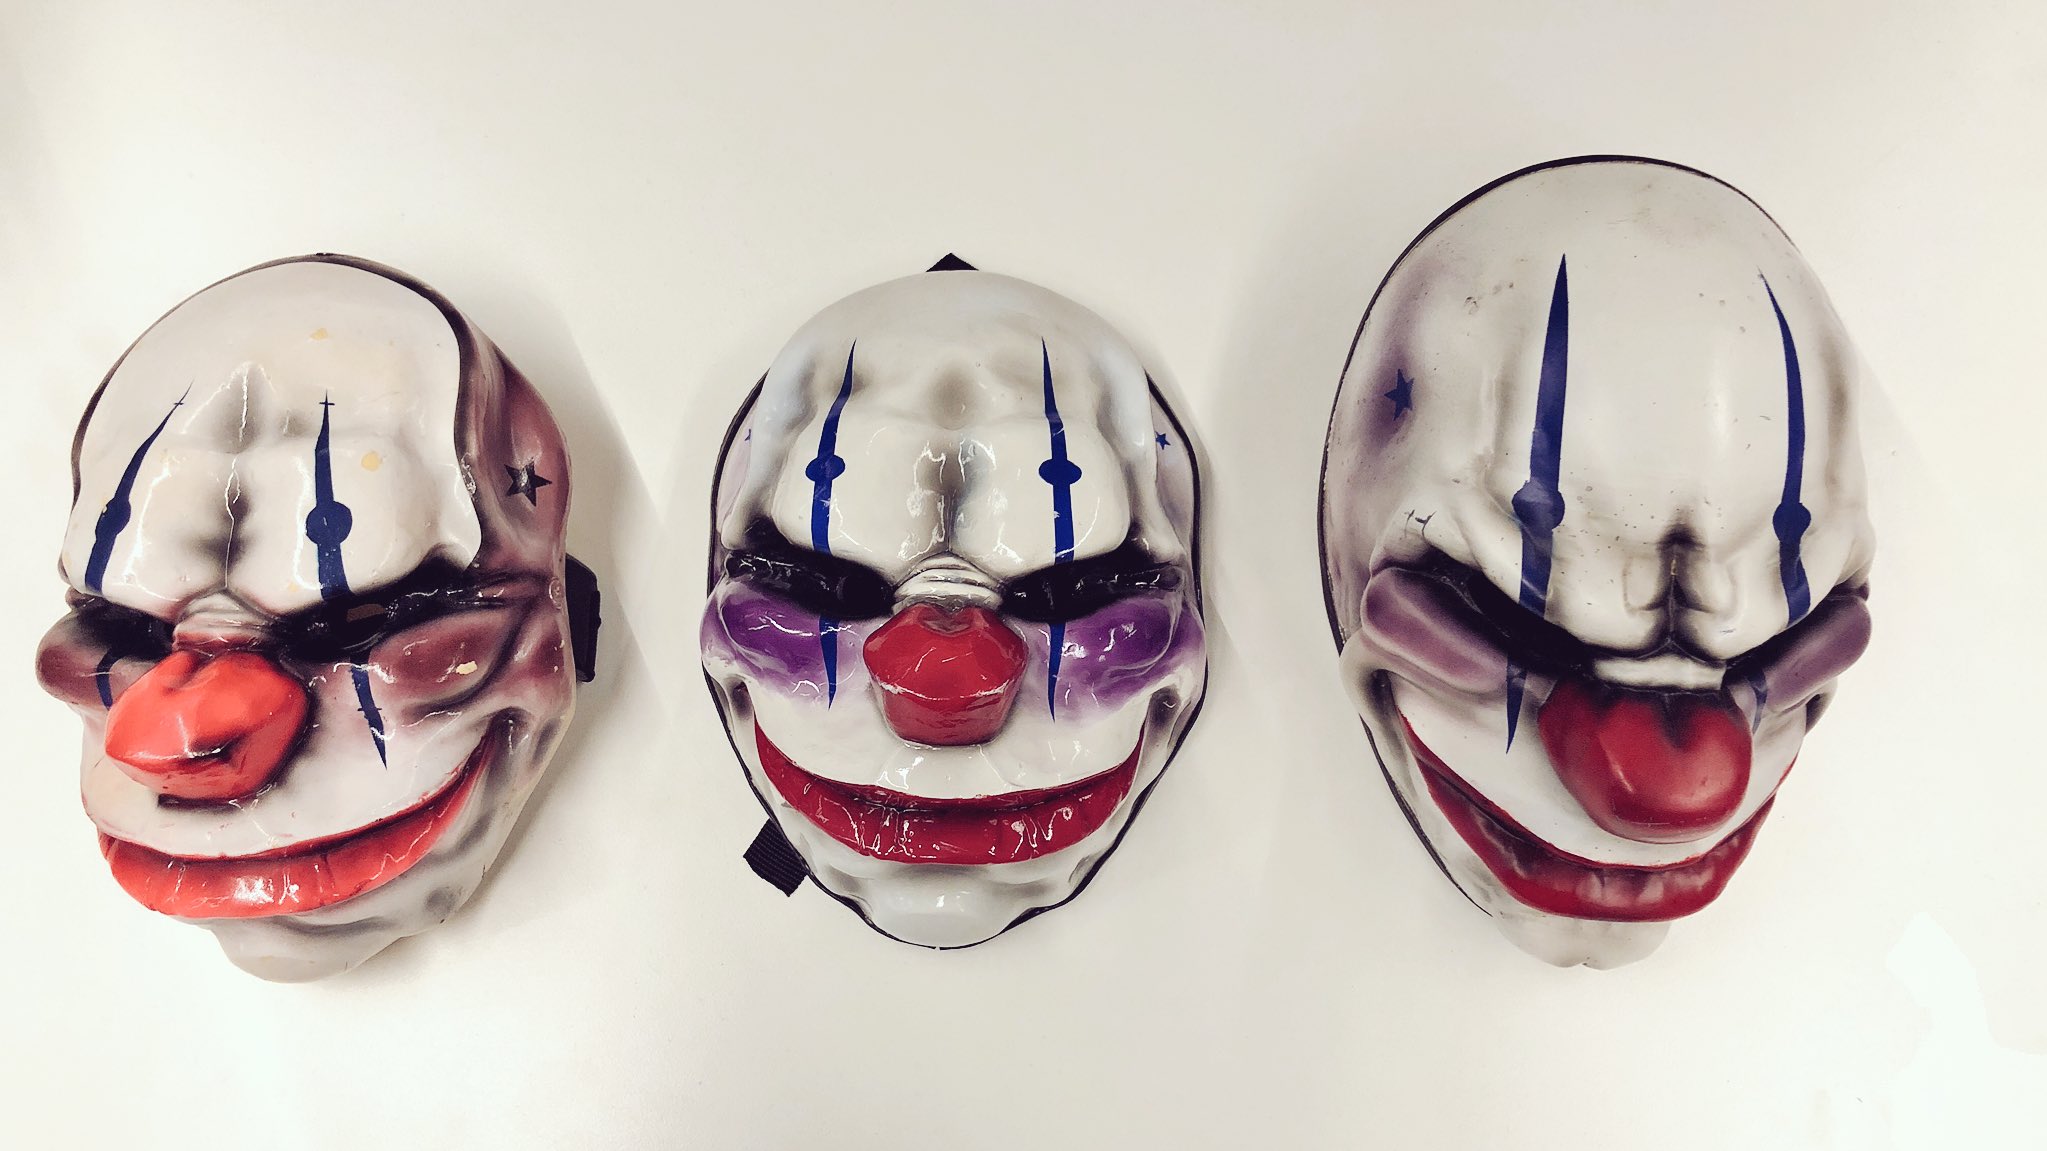 PAYDAY 3 on Twitter: "PAYDAY Art @ctrldashk showing of mask through the years 👀" / Twitter